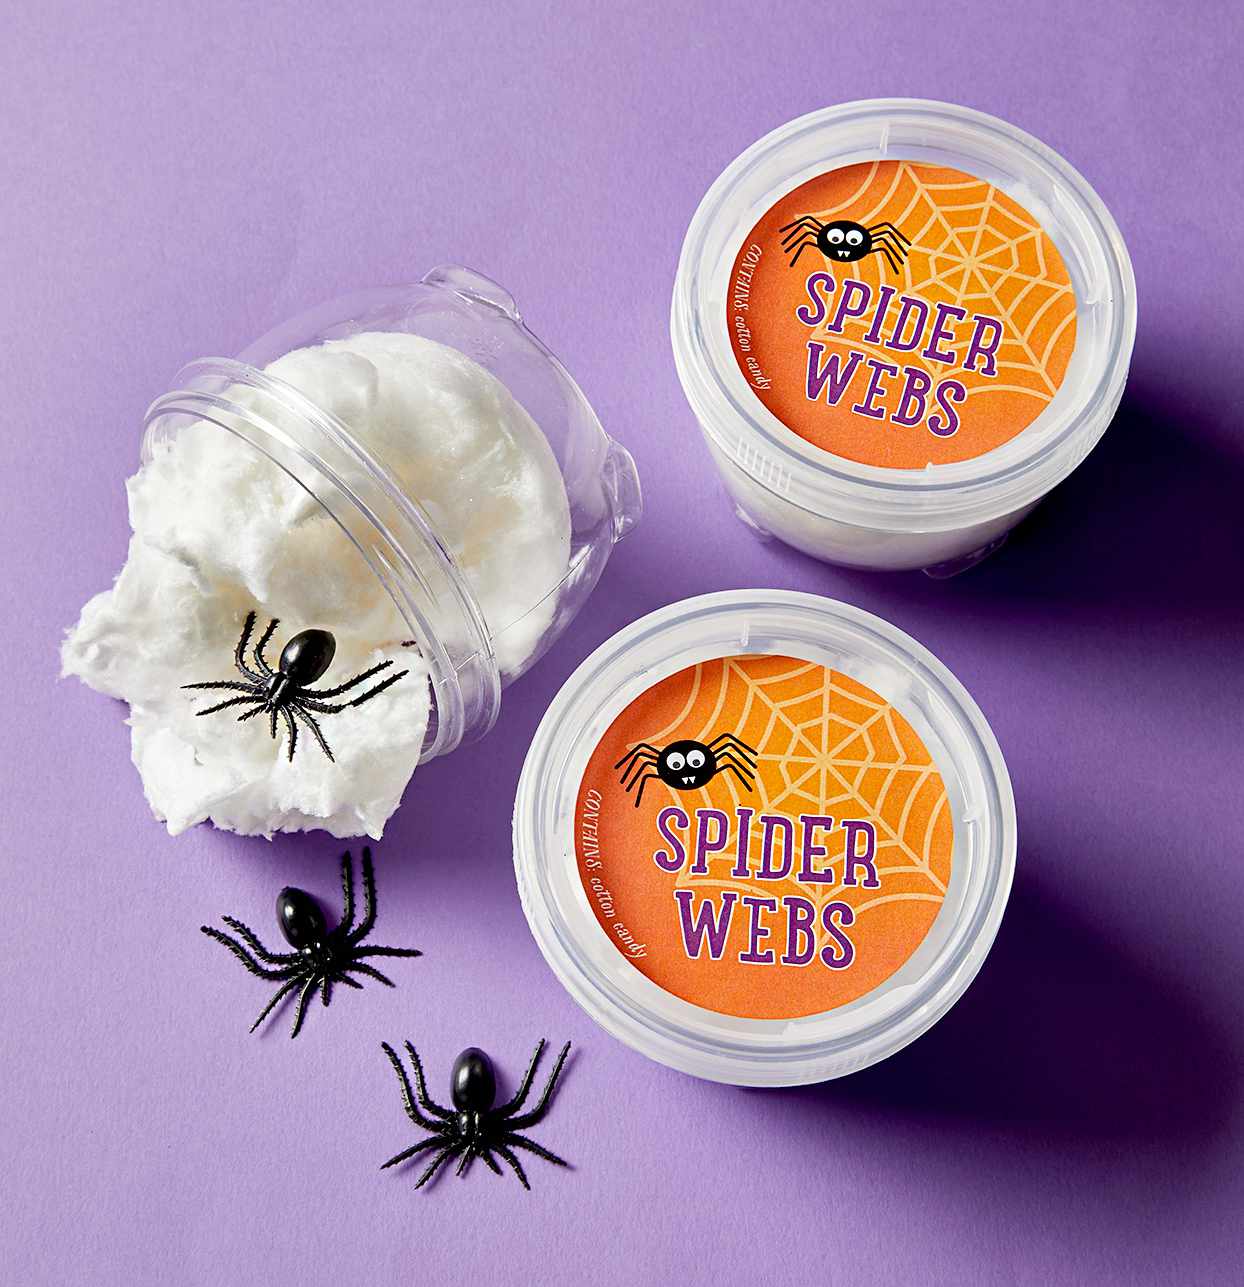 Containers that say "spider webs" with plastic spiders